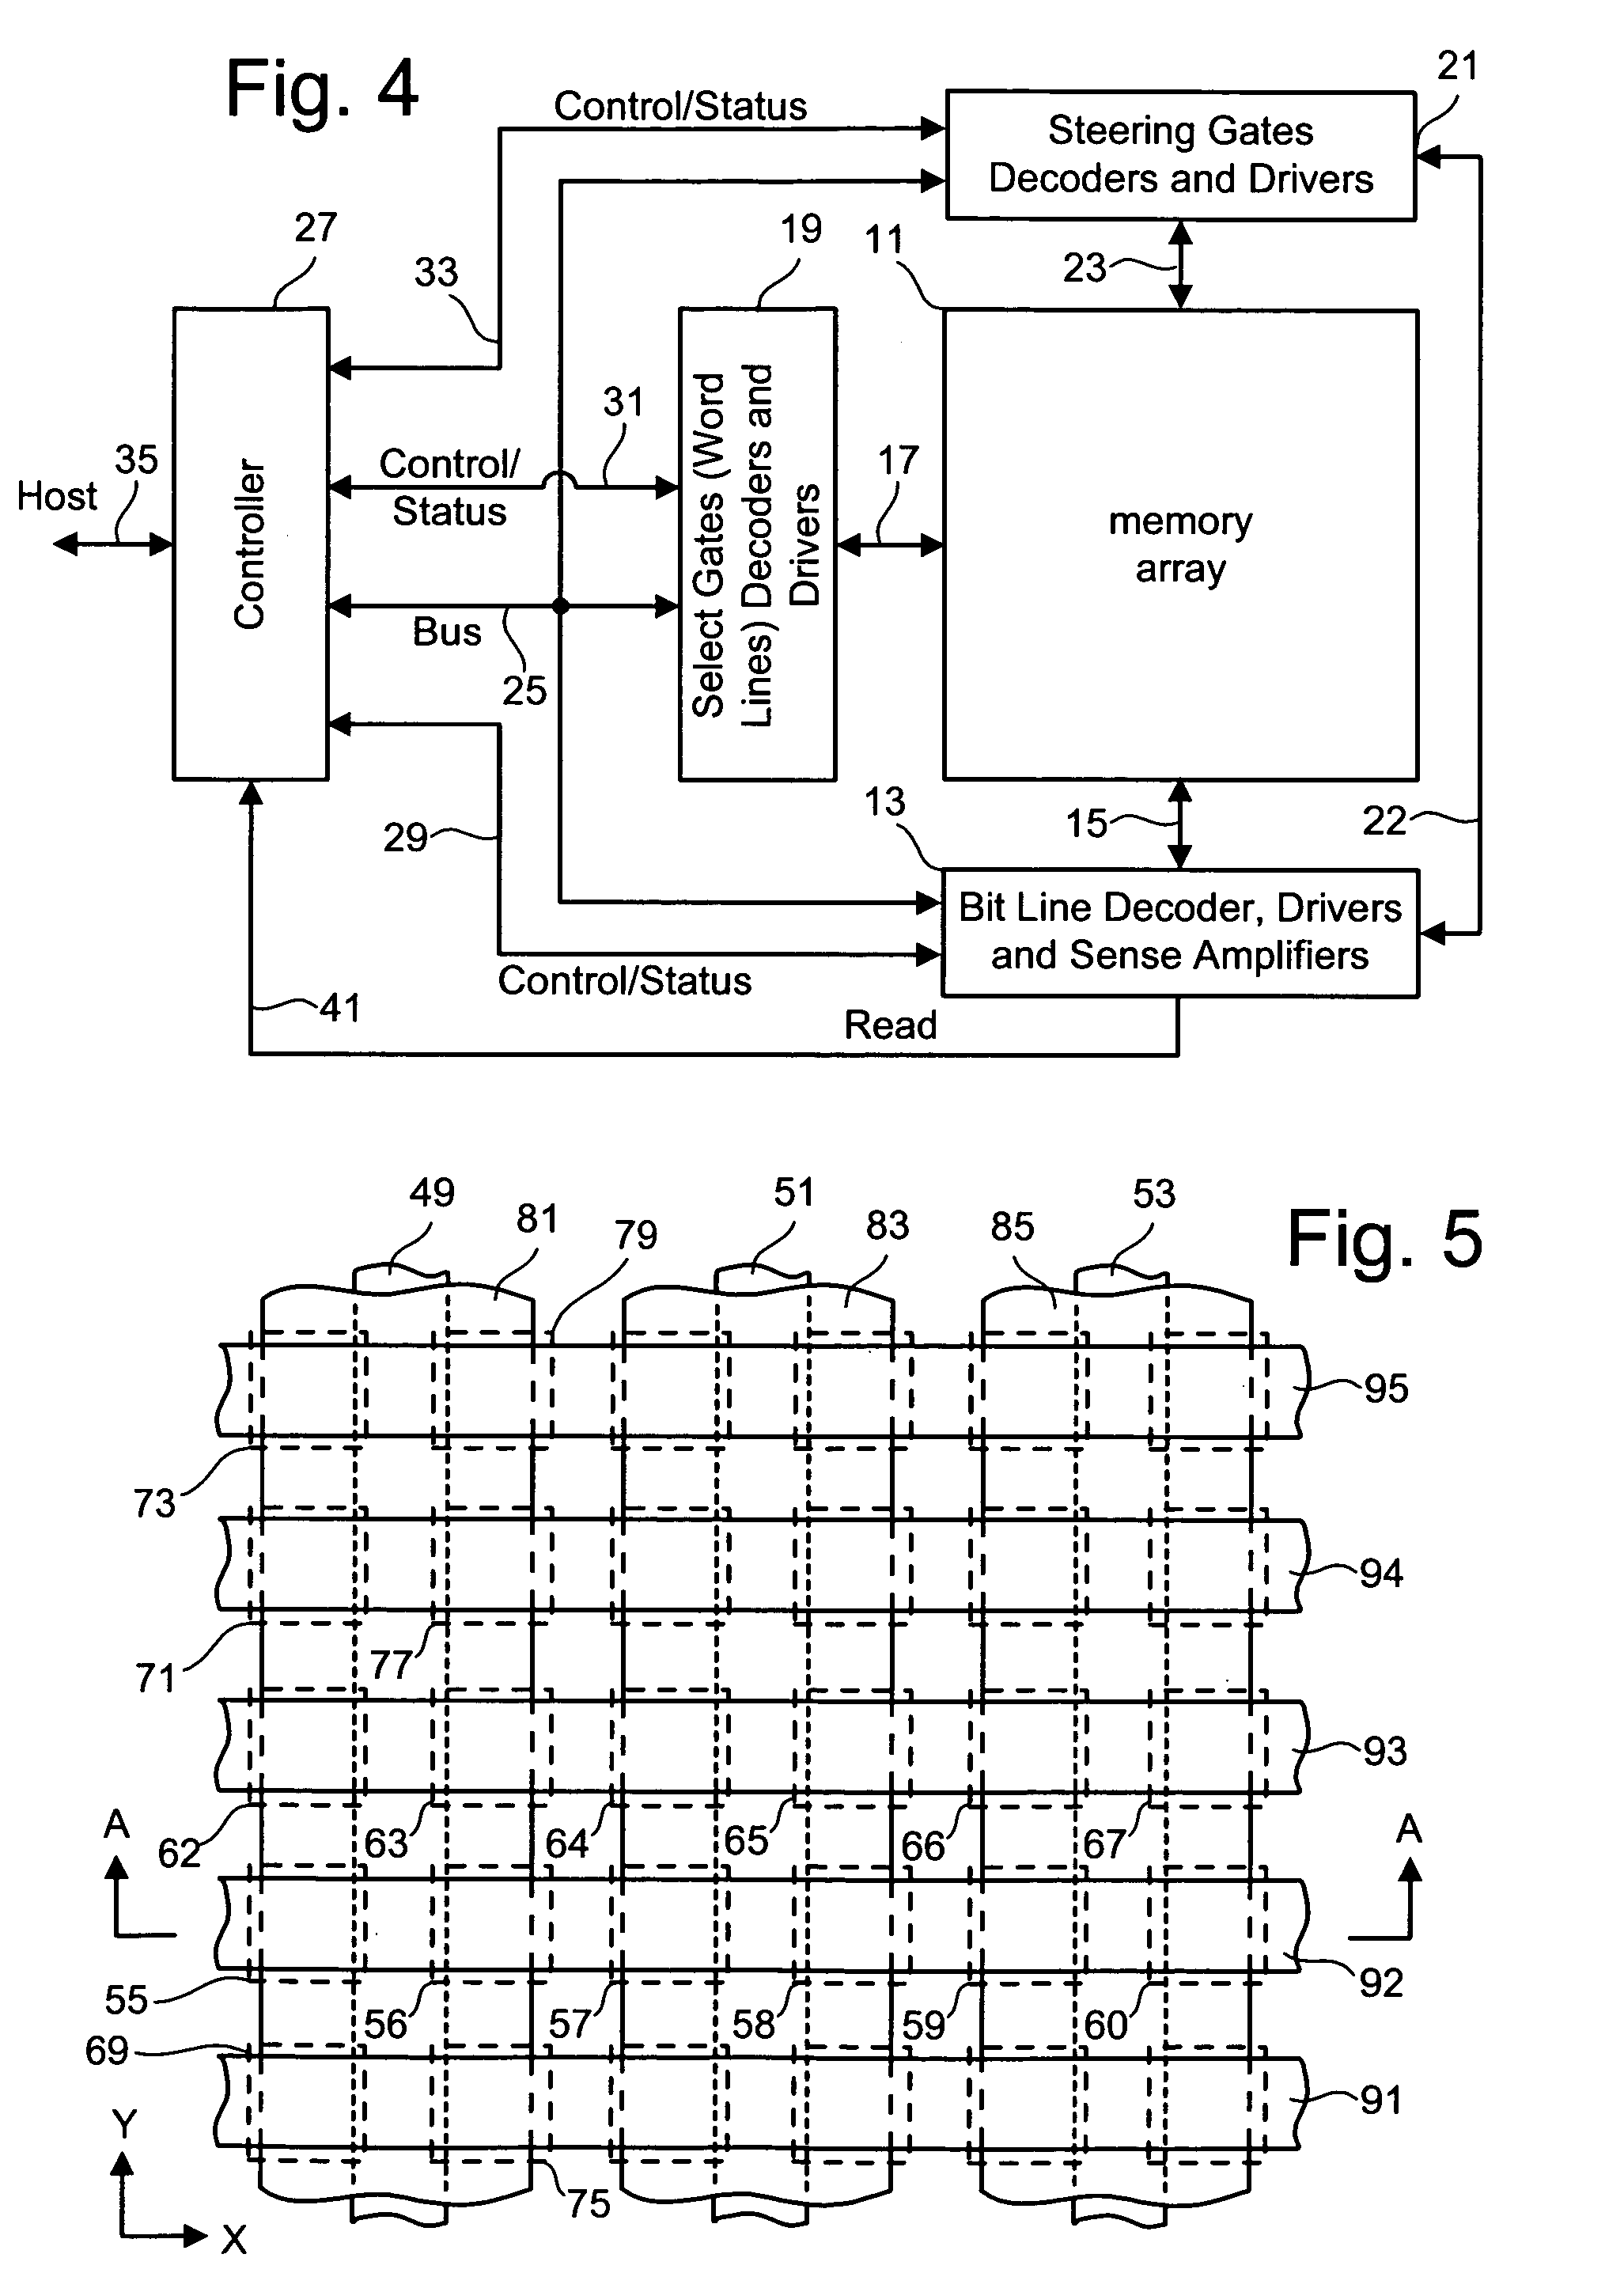 Charge packet metering for coarse/fine programming of non-volatile memory